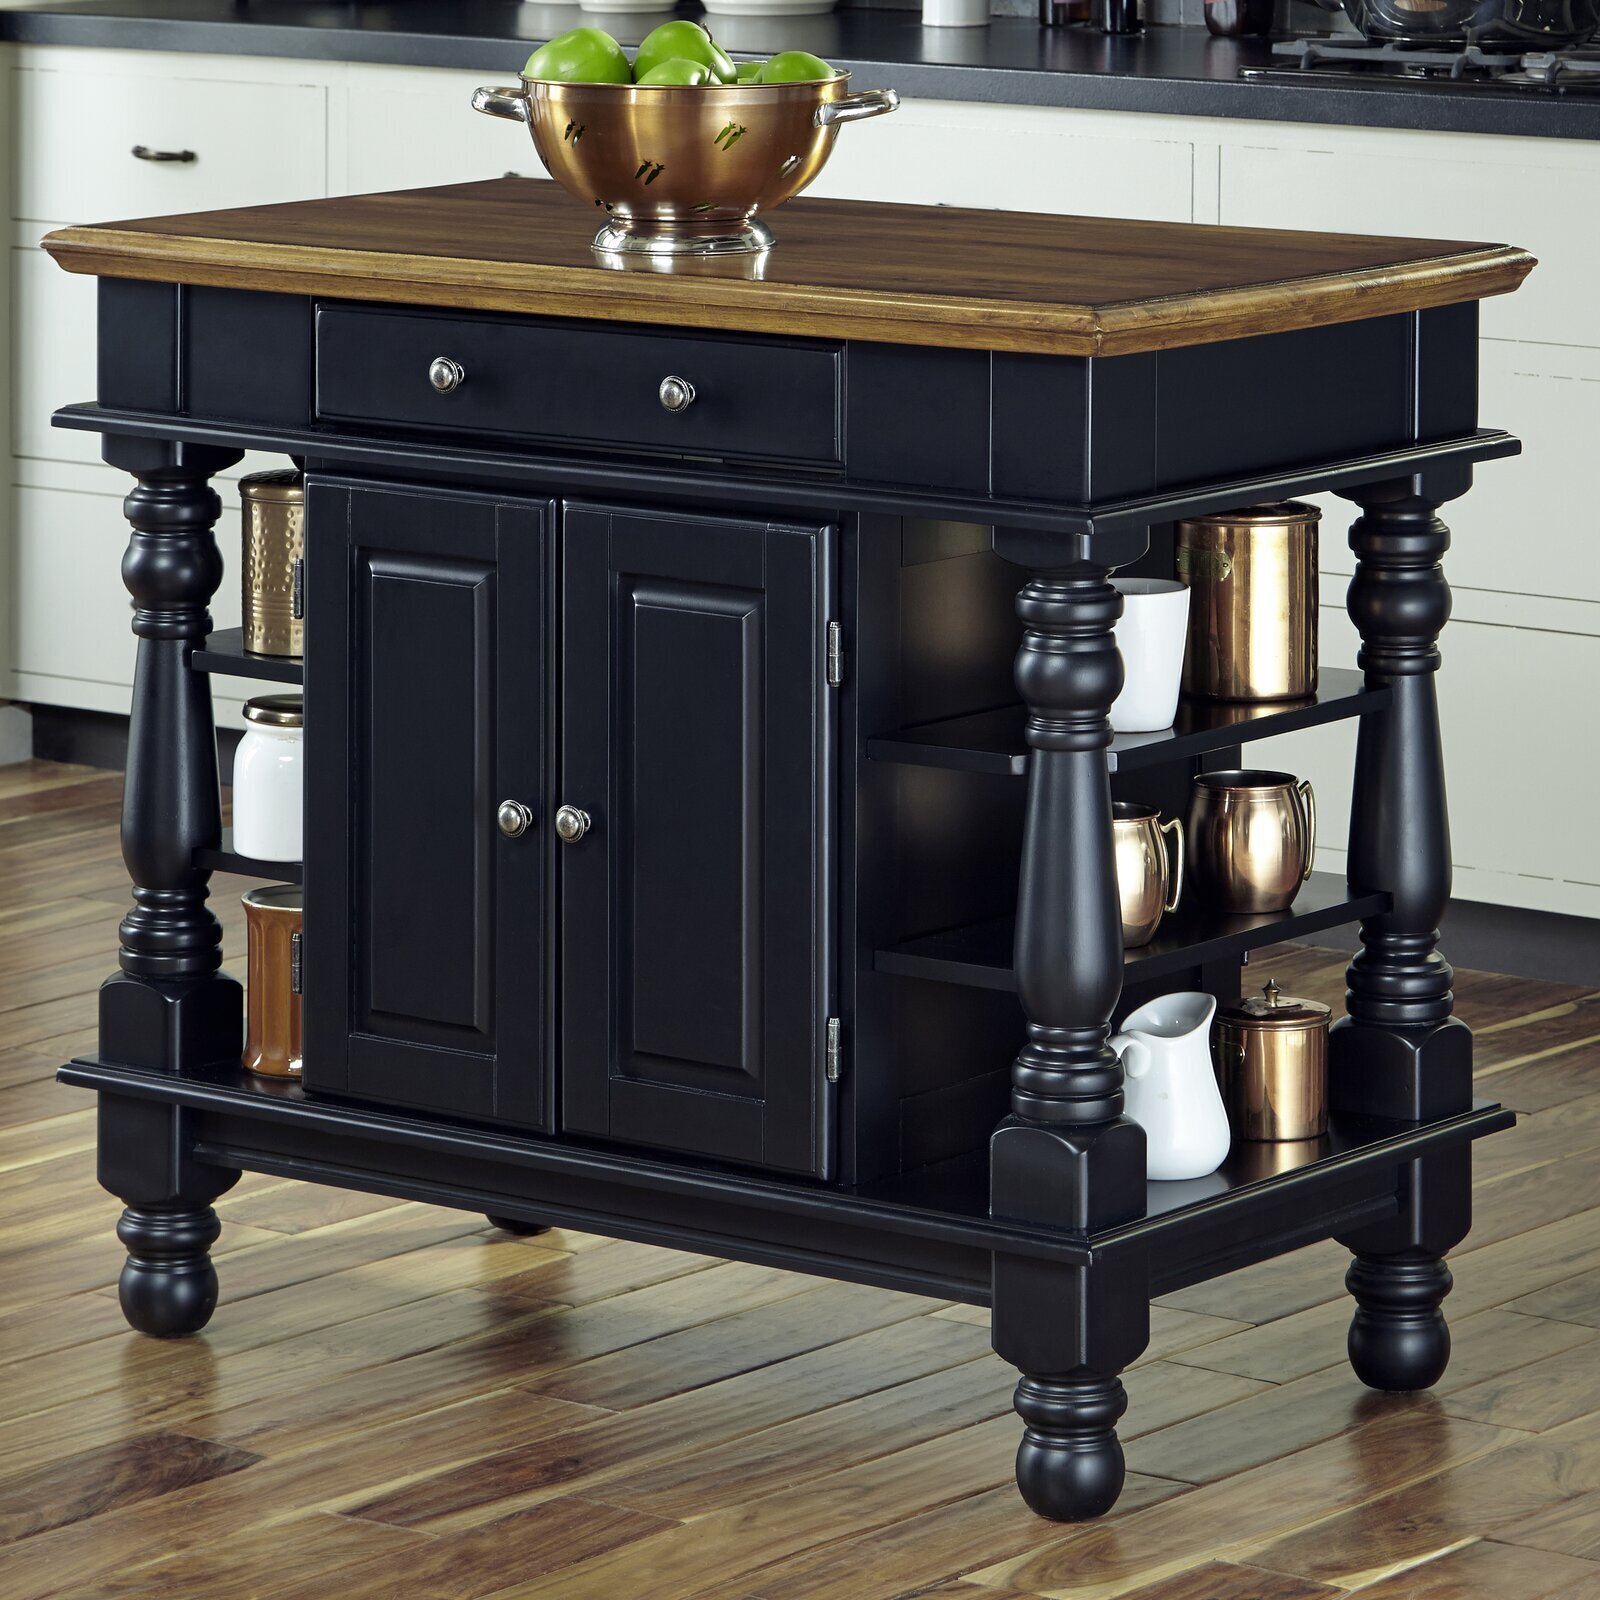 Kitchen island with solid wood top